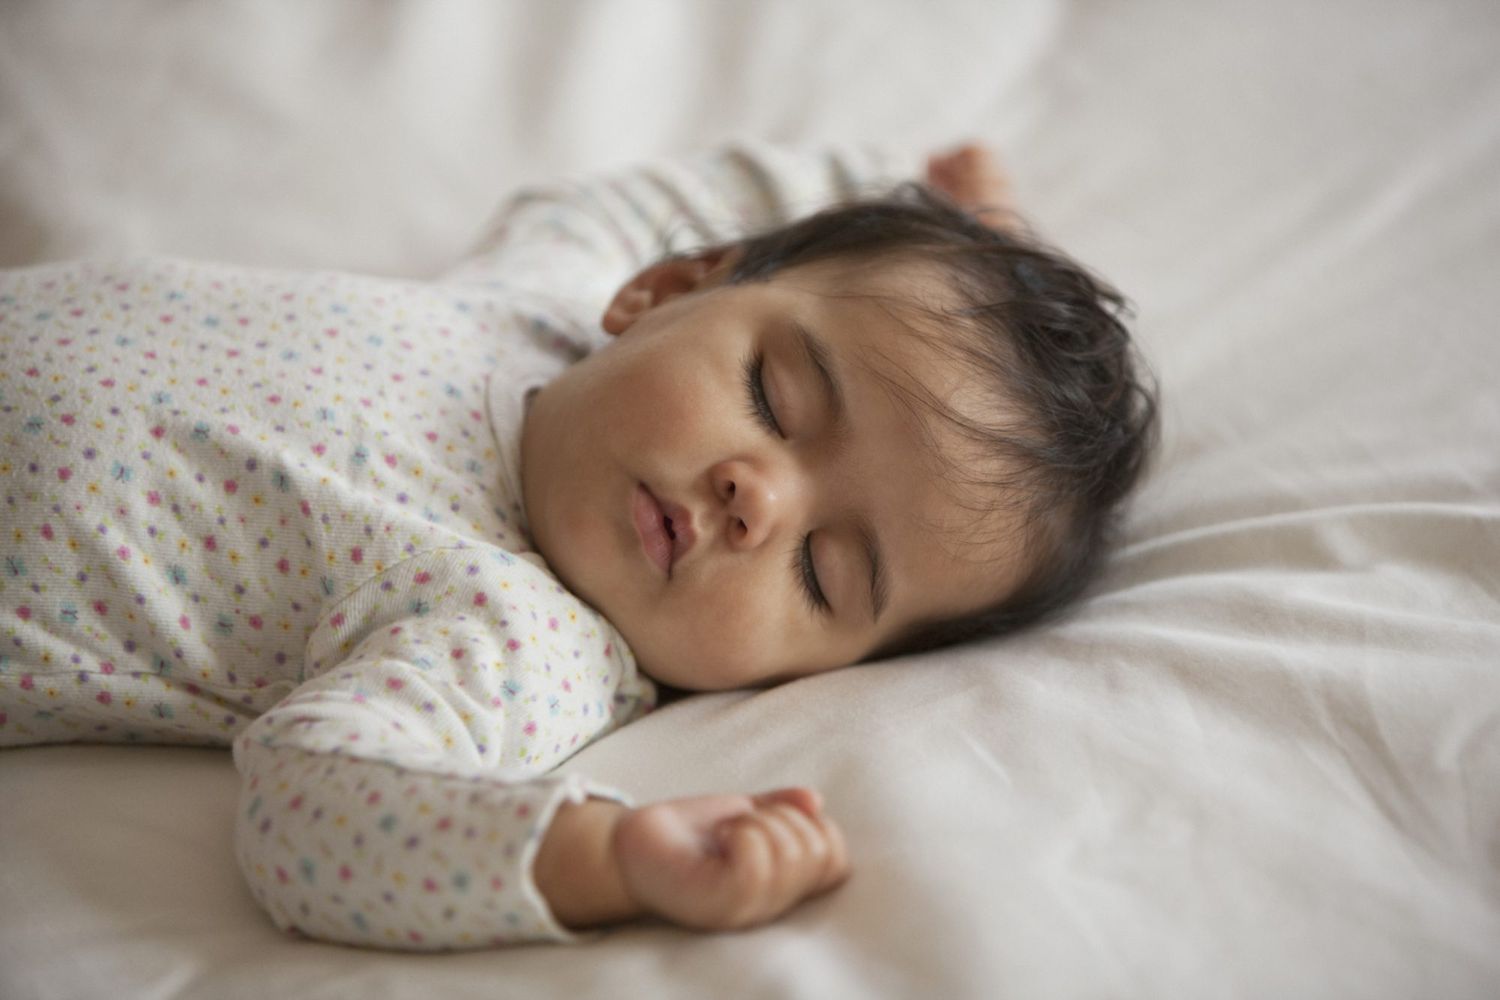 How Much Sleep Does a 4-Month-Old Baby Need?